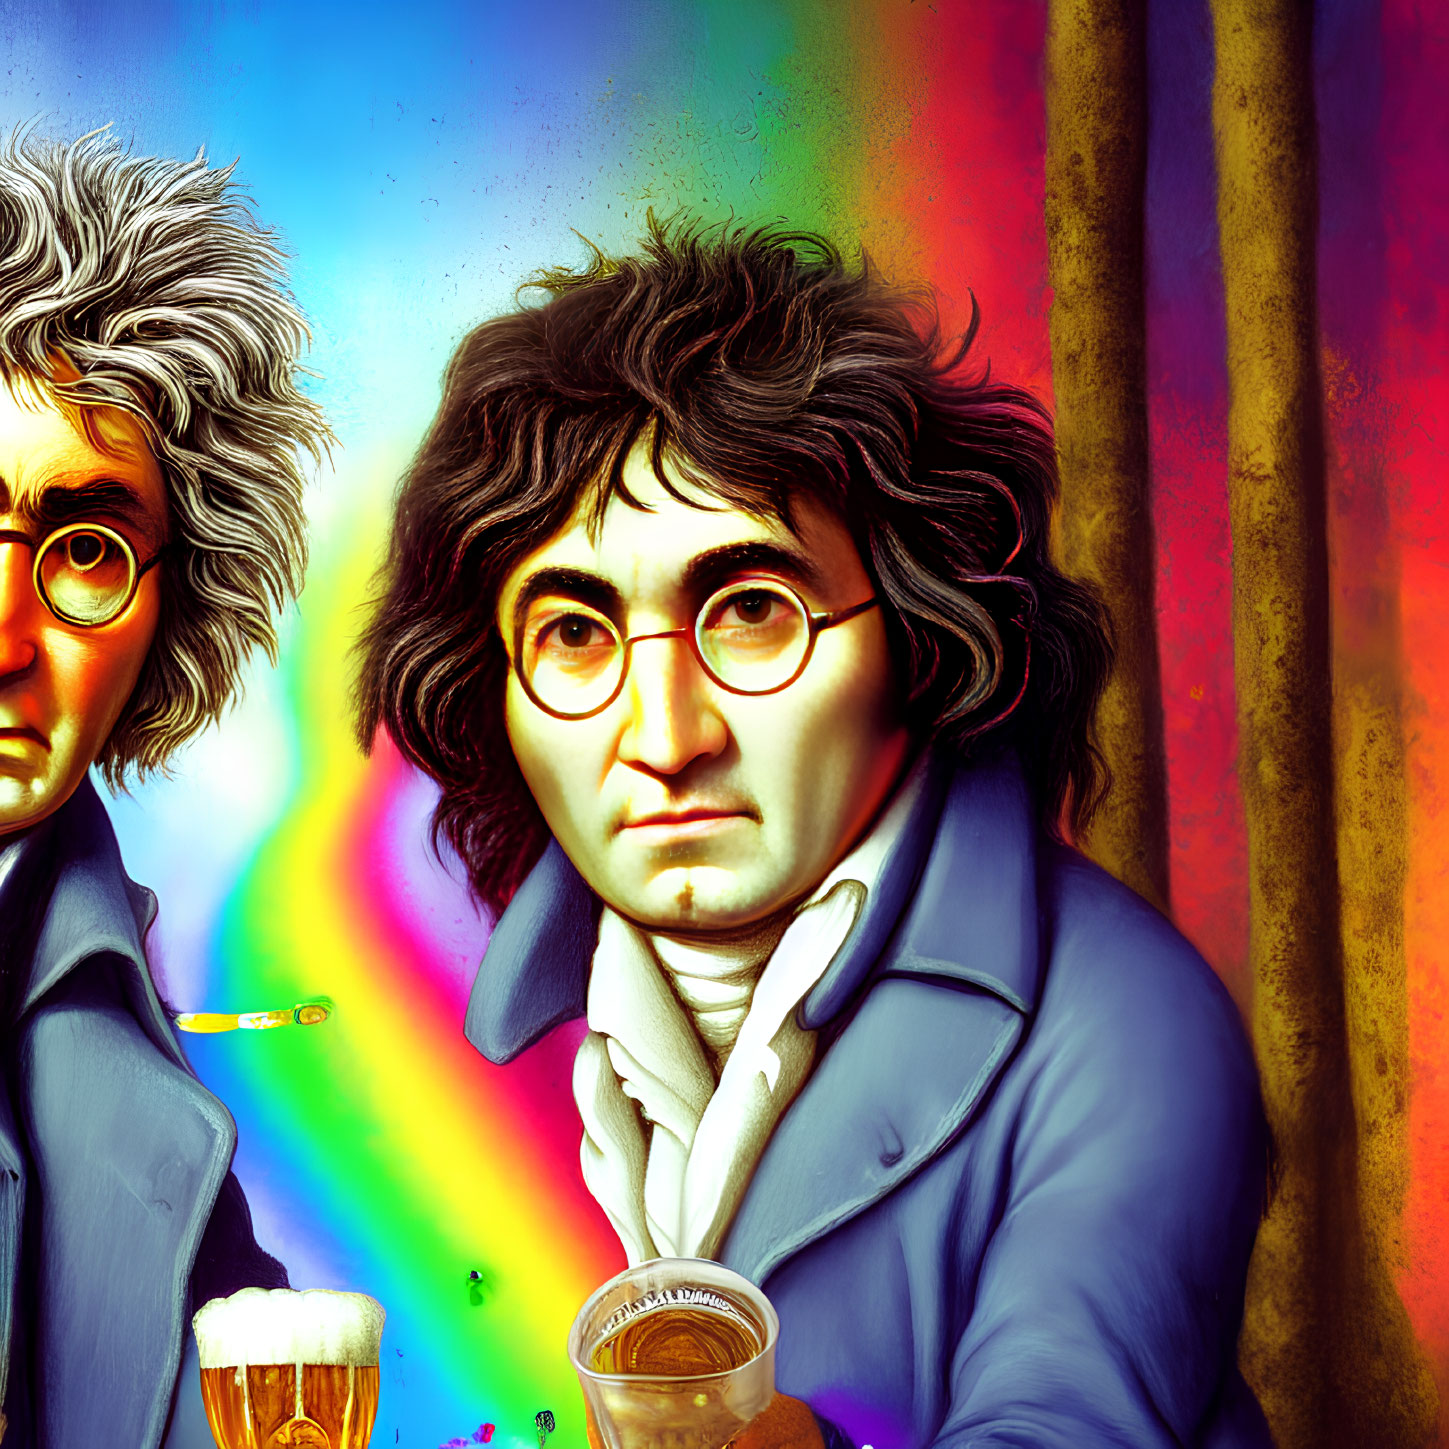 Colorful illustration of two men with exaggerated facial features against a vibrant background